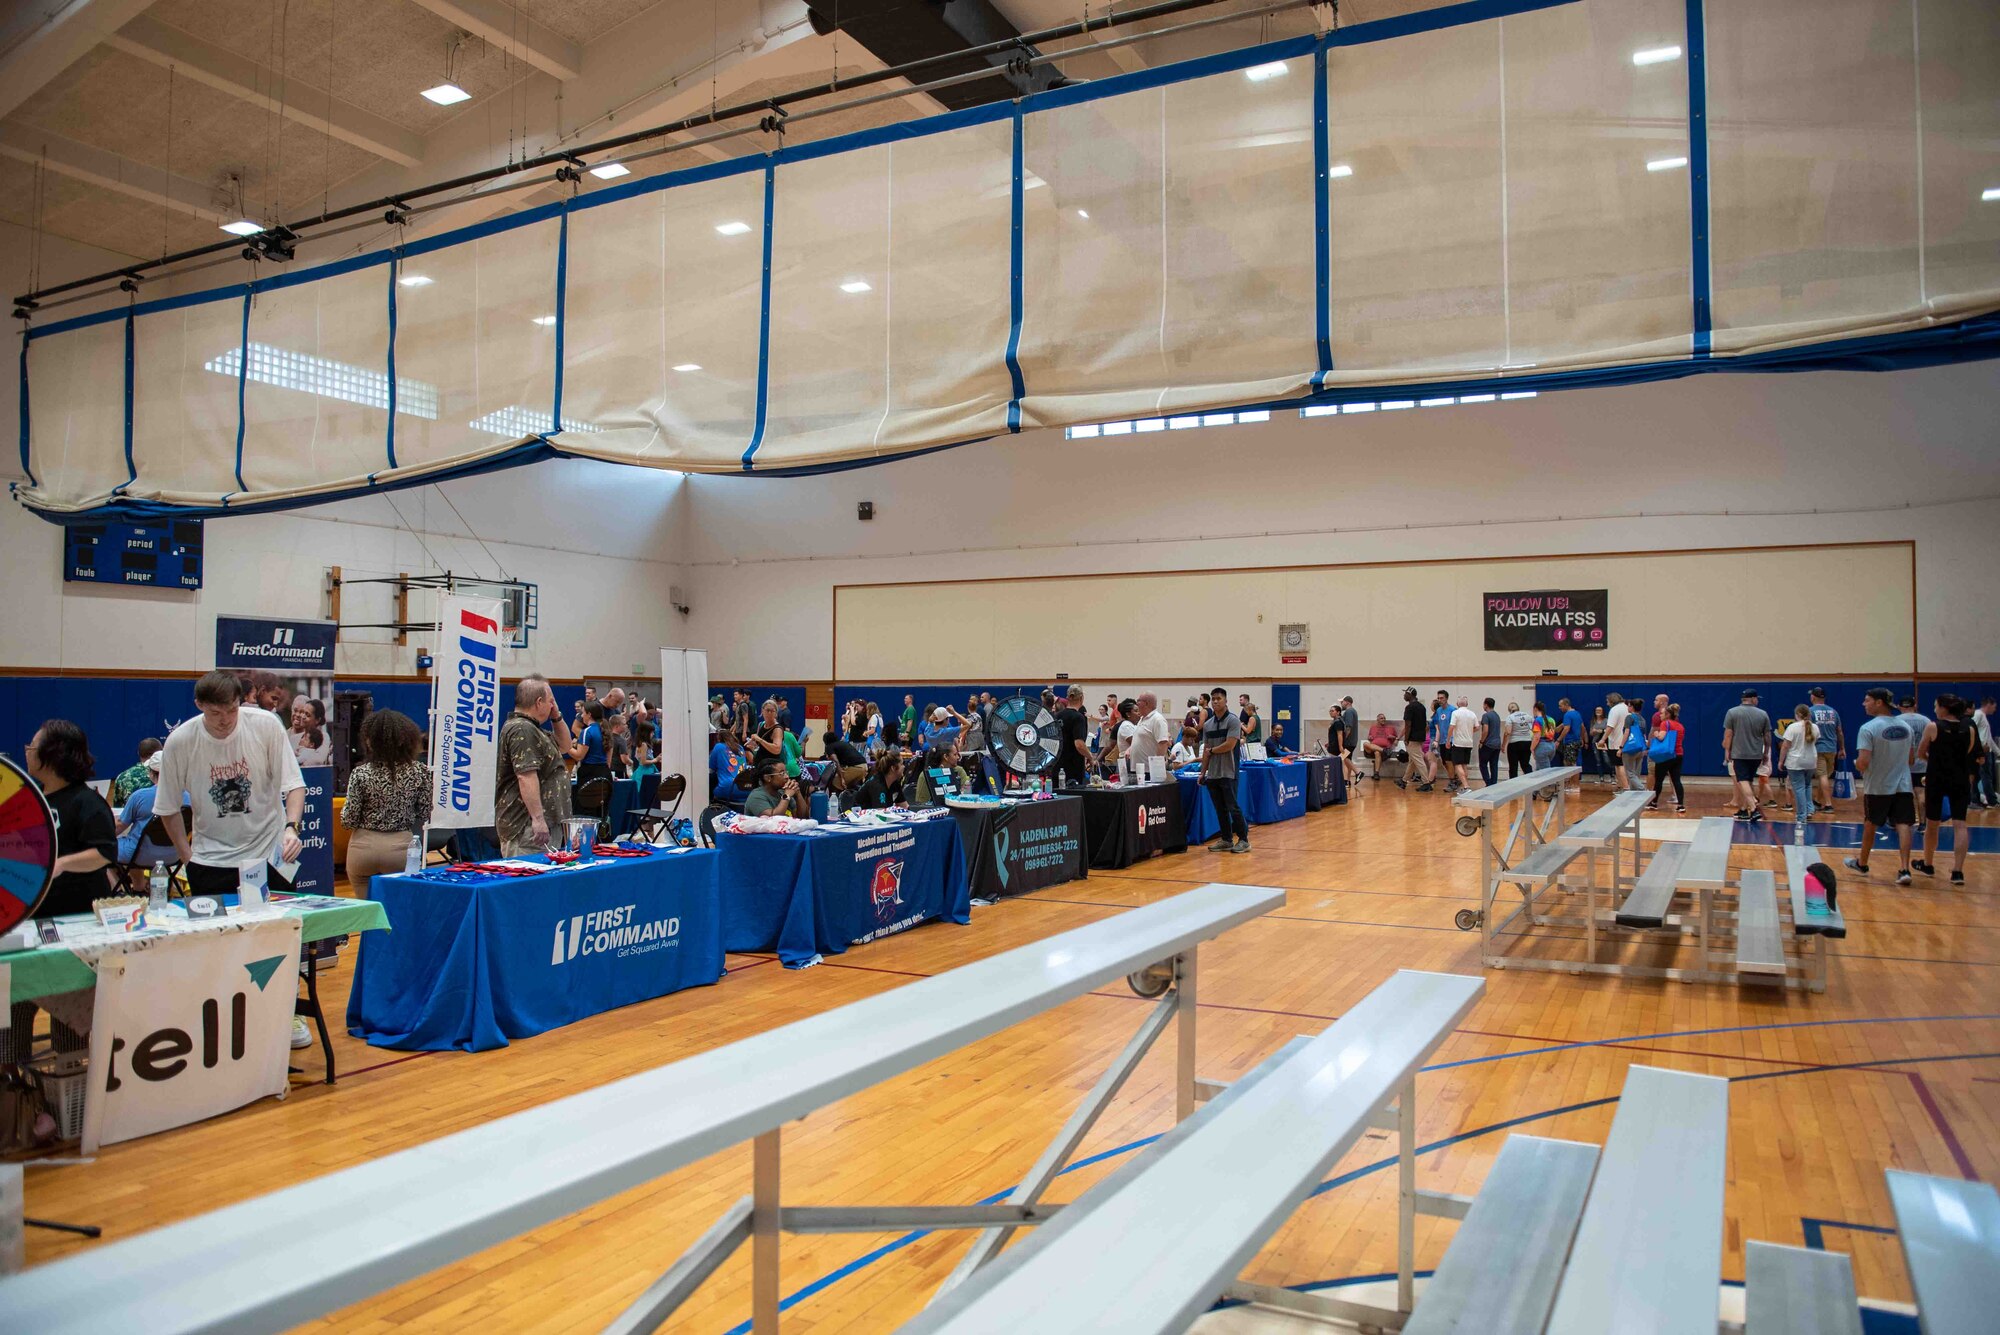 An event occurs inside of a gym with informational booths